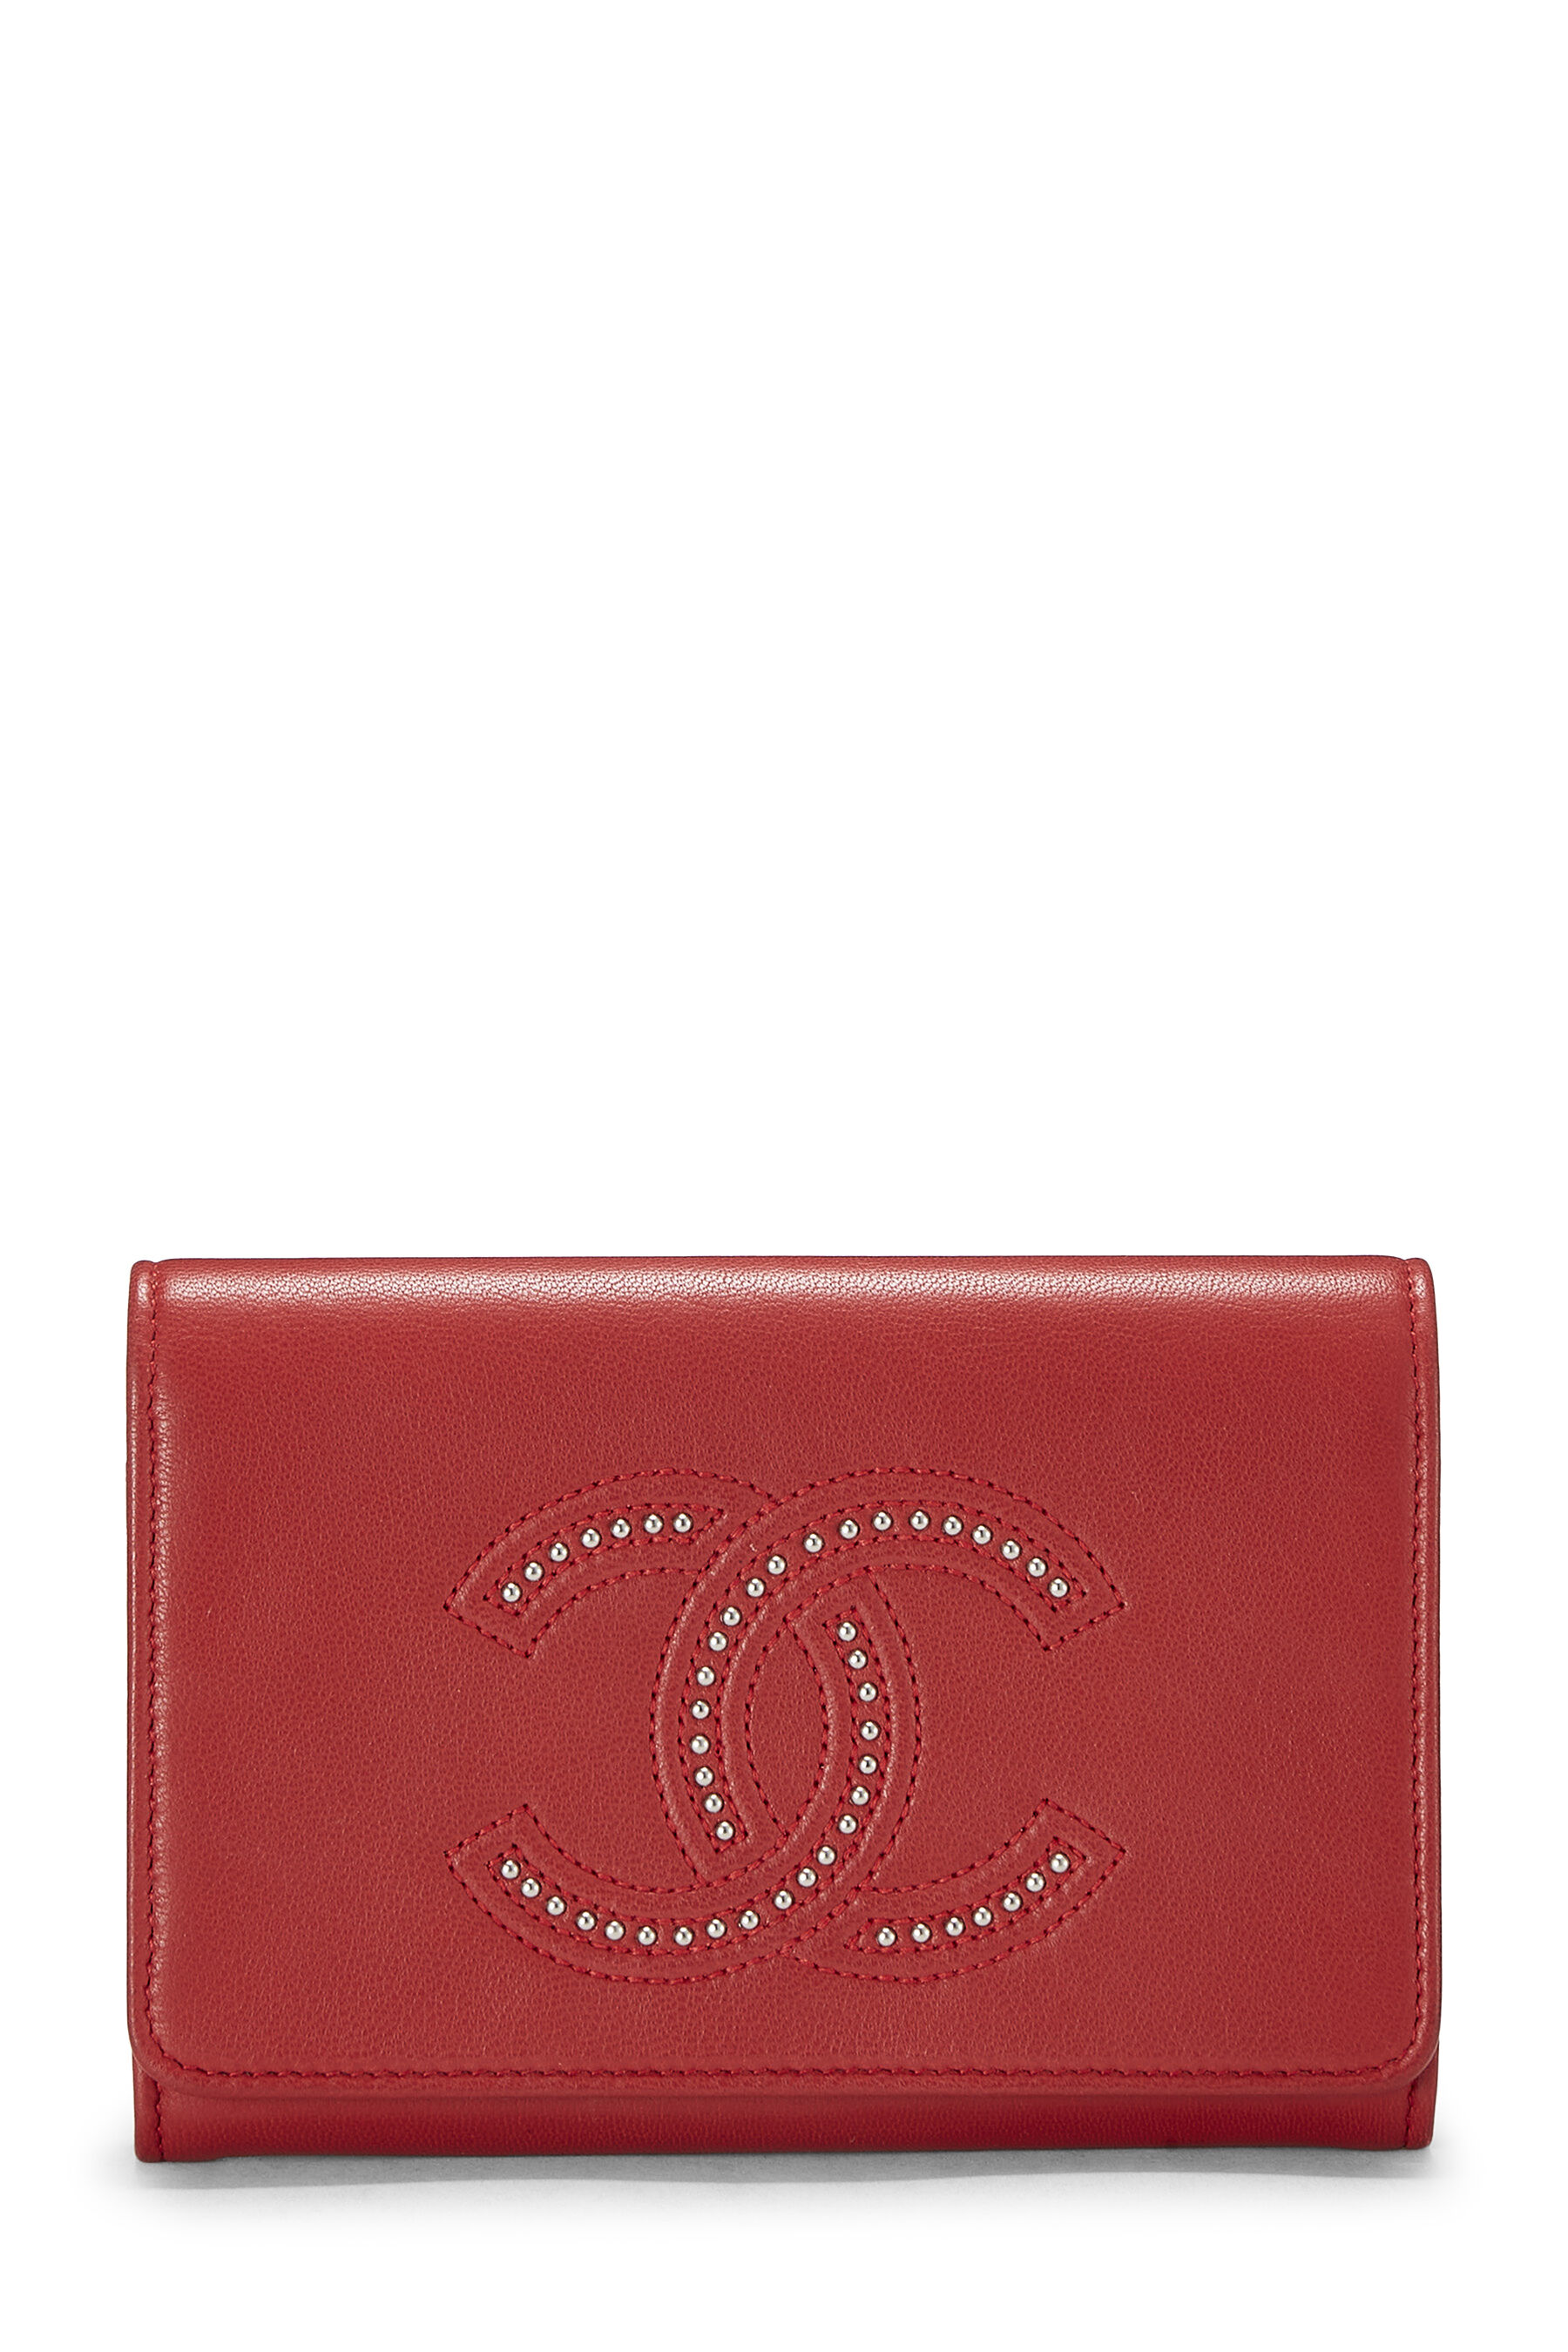 Chanel Quilted Bifold French Wallet Deep Red Lambskin – ＬＯＶＥＬＯＴＳＬＵＸＵＲＹ